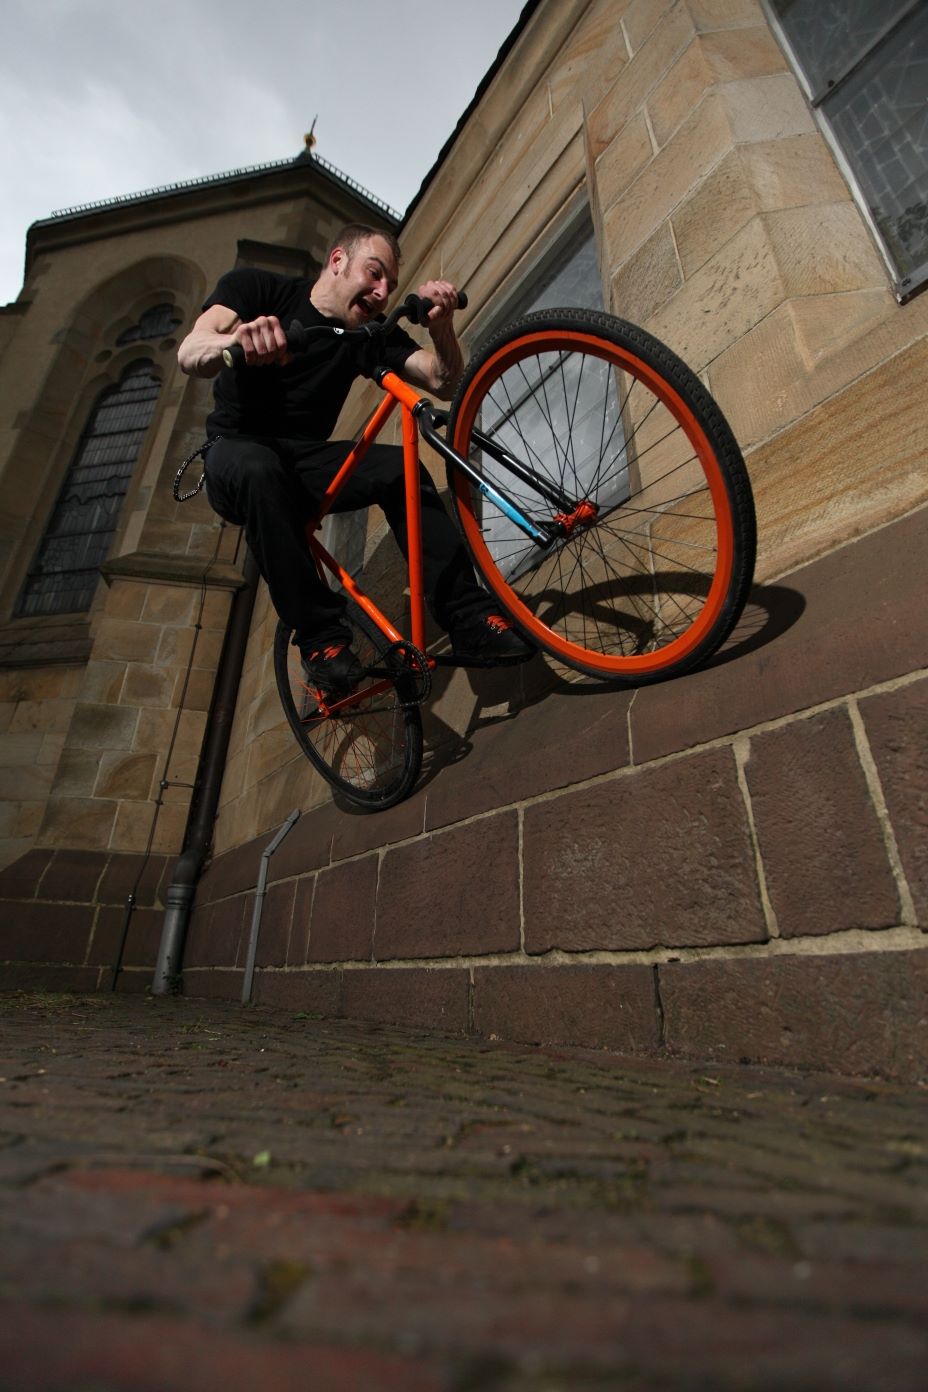 north-wallride-by-pino-for-fastpace-web.jpg